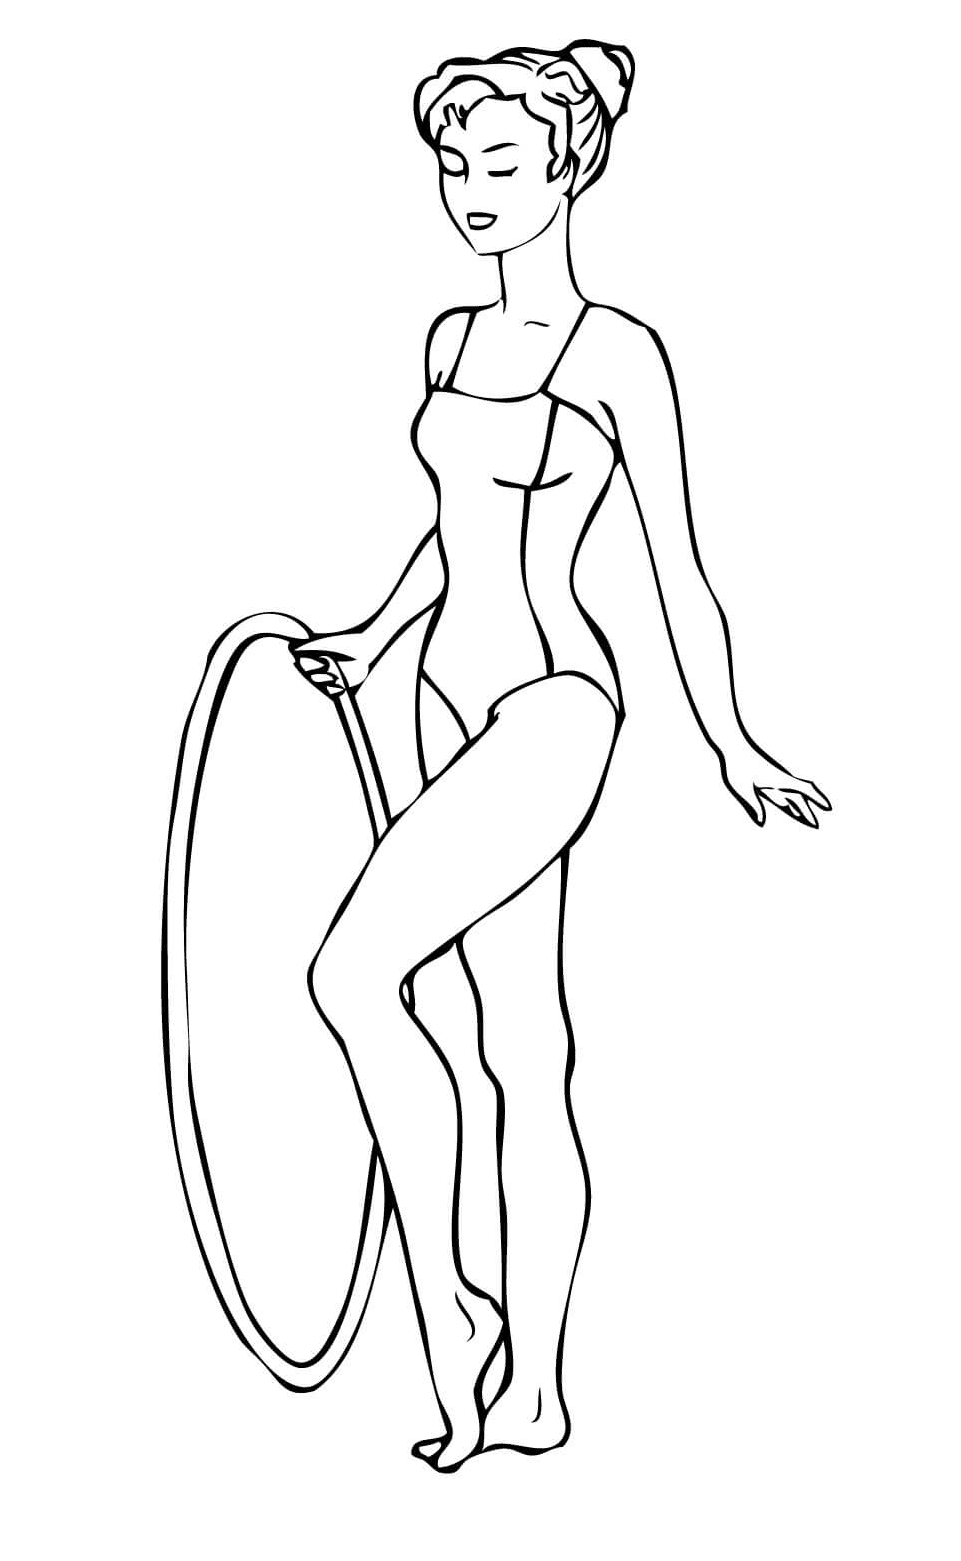 Gymnastics Routine With A Hoop Coloring Pages